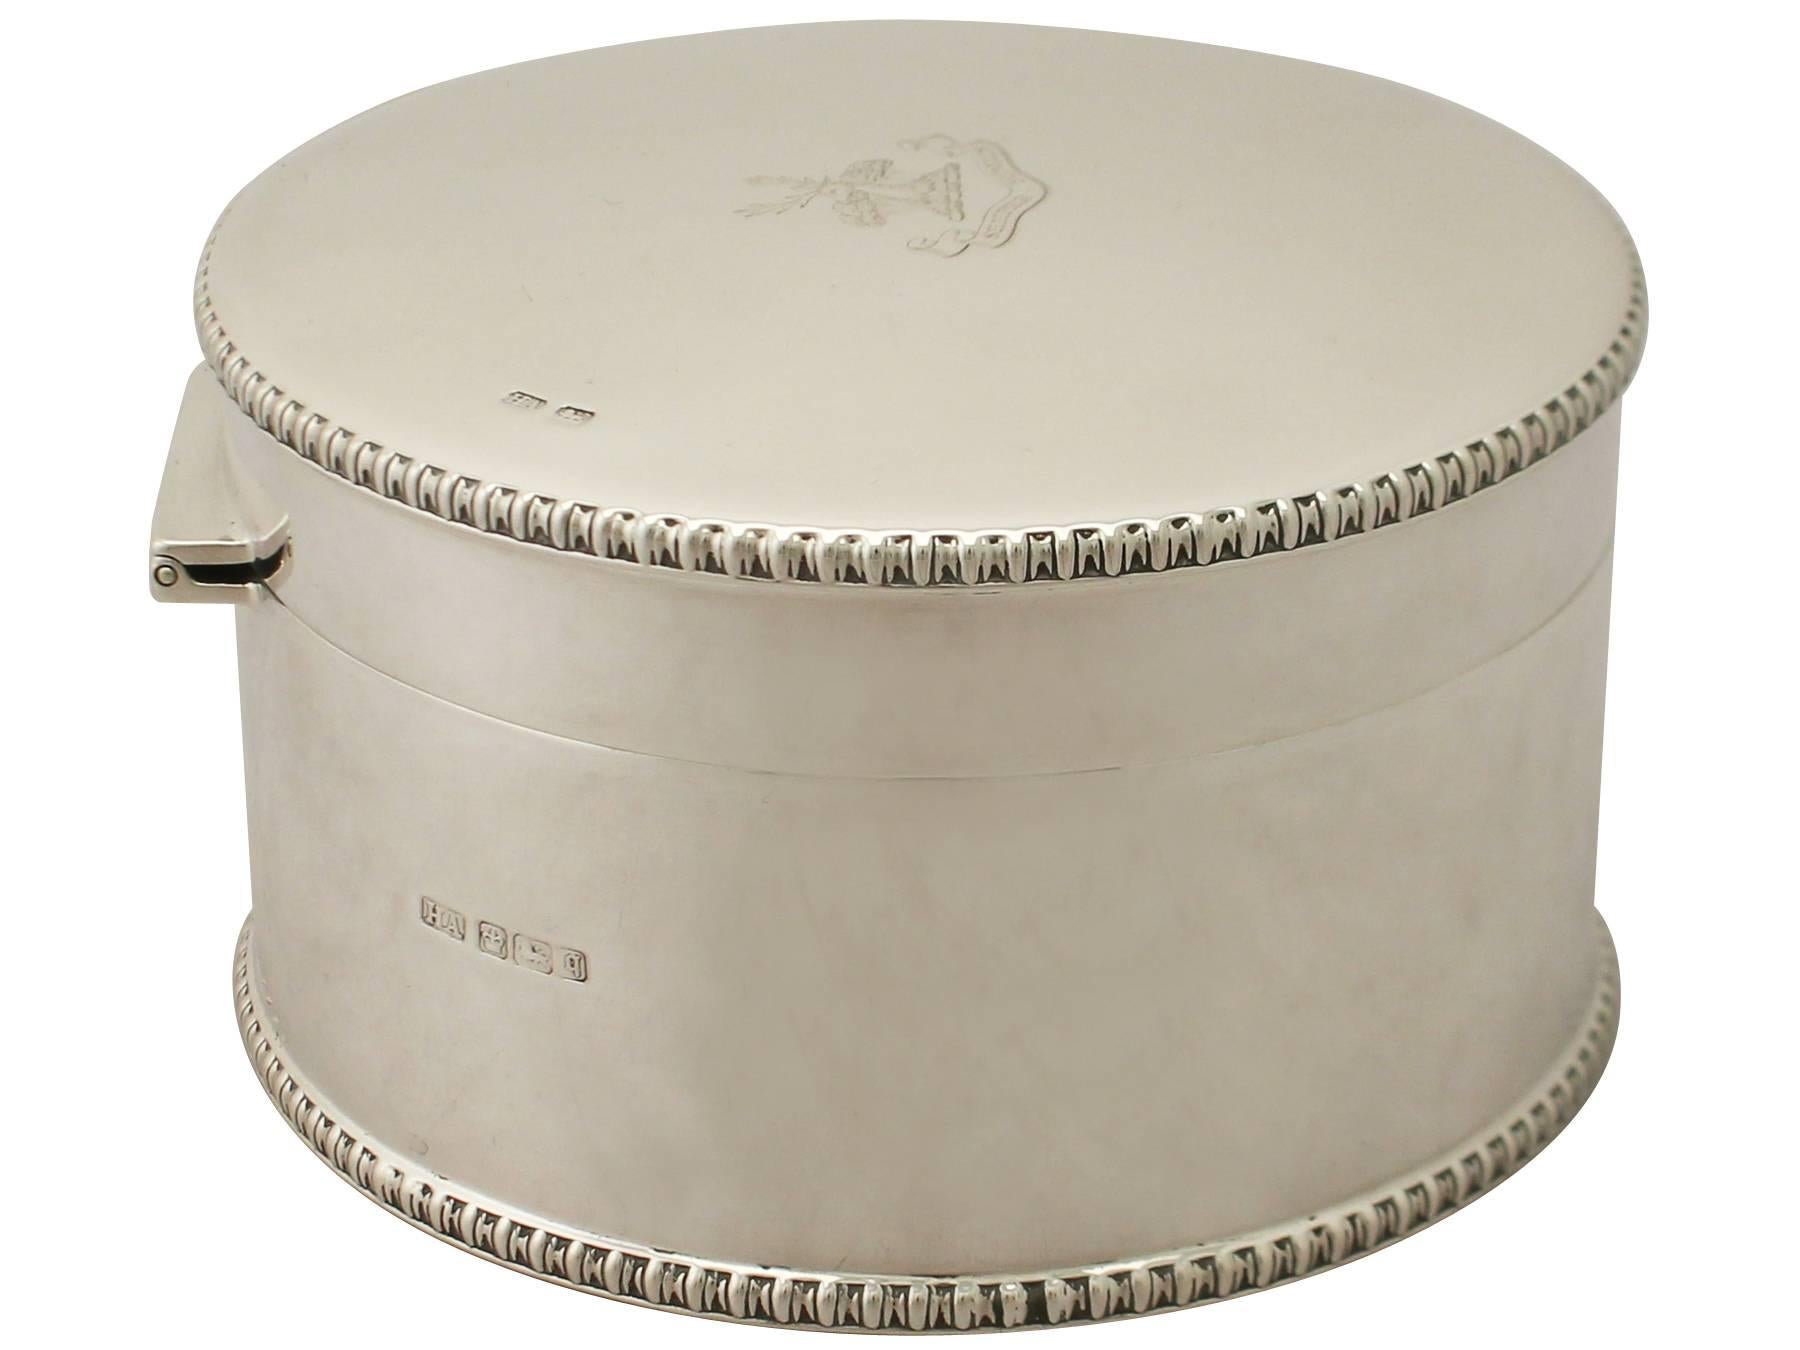 An exceptional, fine and impressive antique Edwardian English sterling silver biscuit box; an addition to our silver teaware collection.

This exceptional antique Edwardian sterling silver biscuit box has a plain circular form.

The surface of